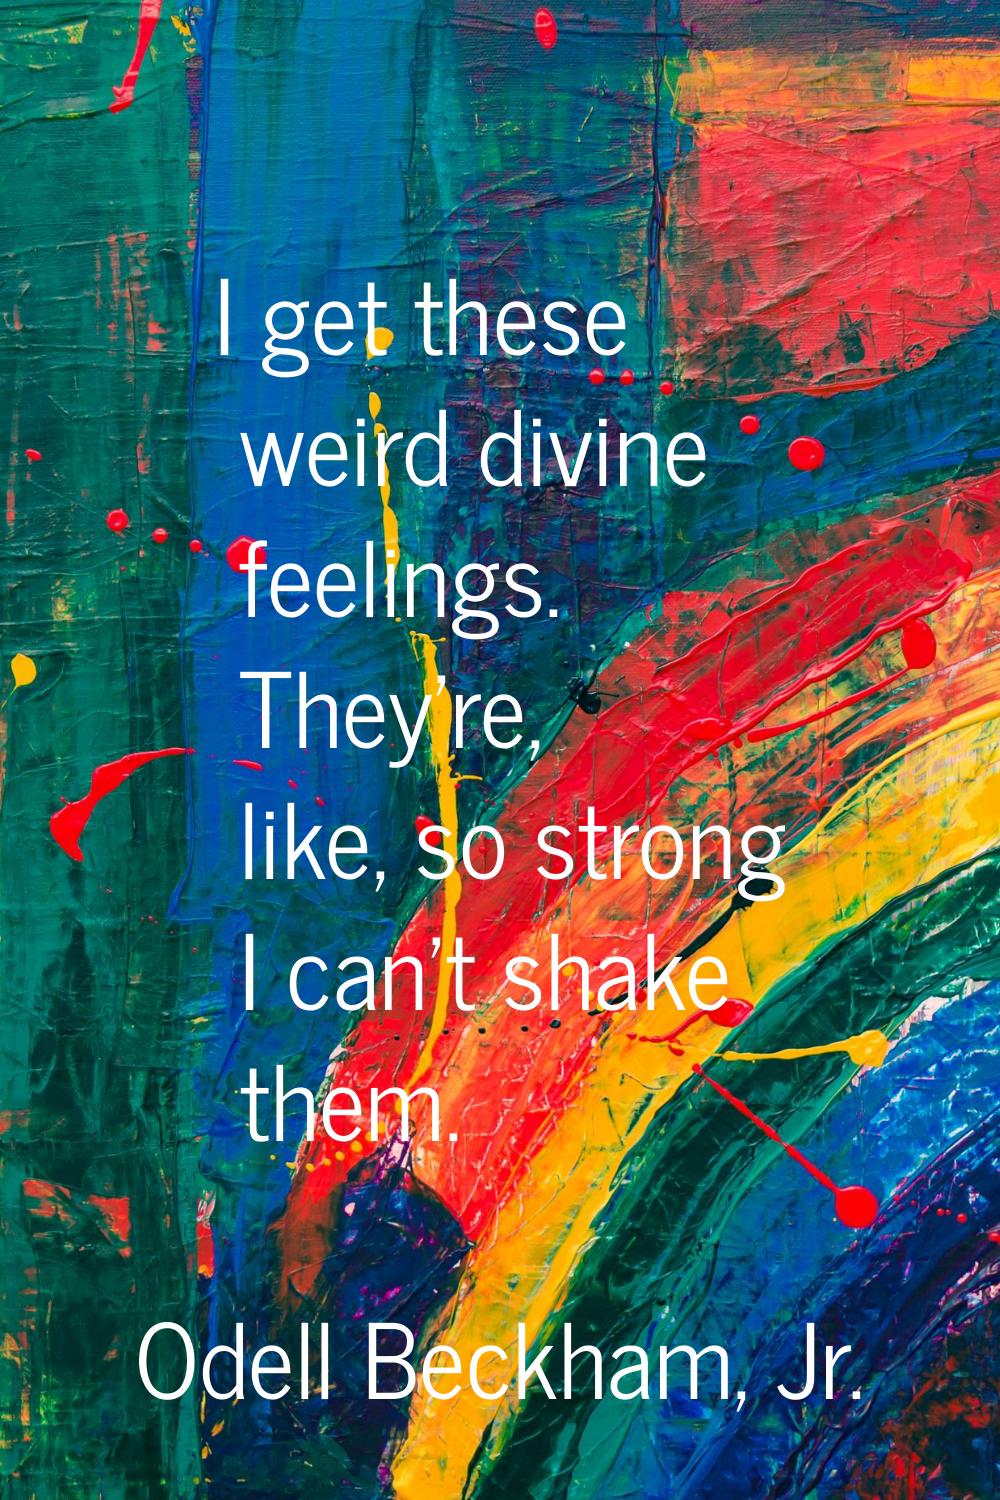 I get these weird divine feelings. They're, like, so strong I can't shake them.